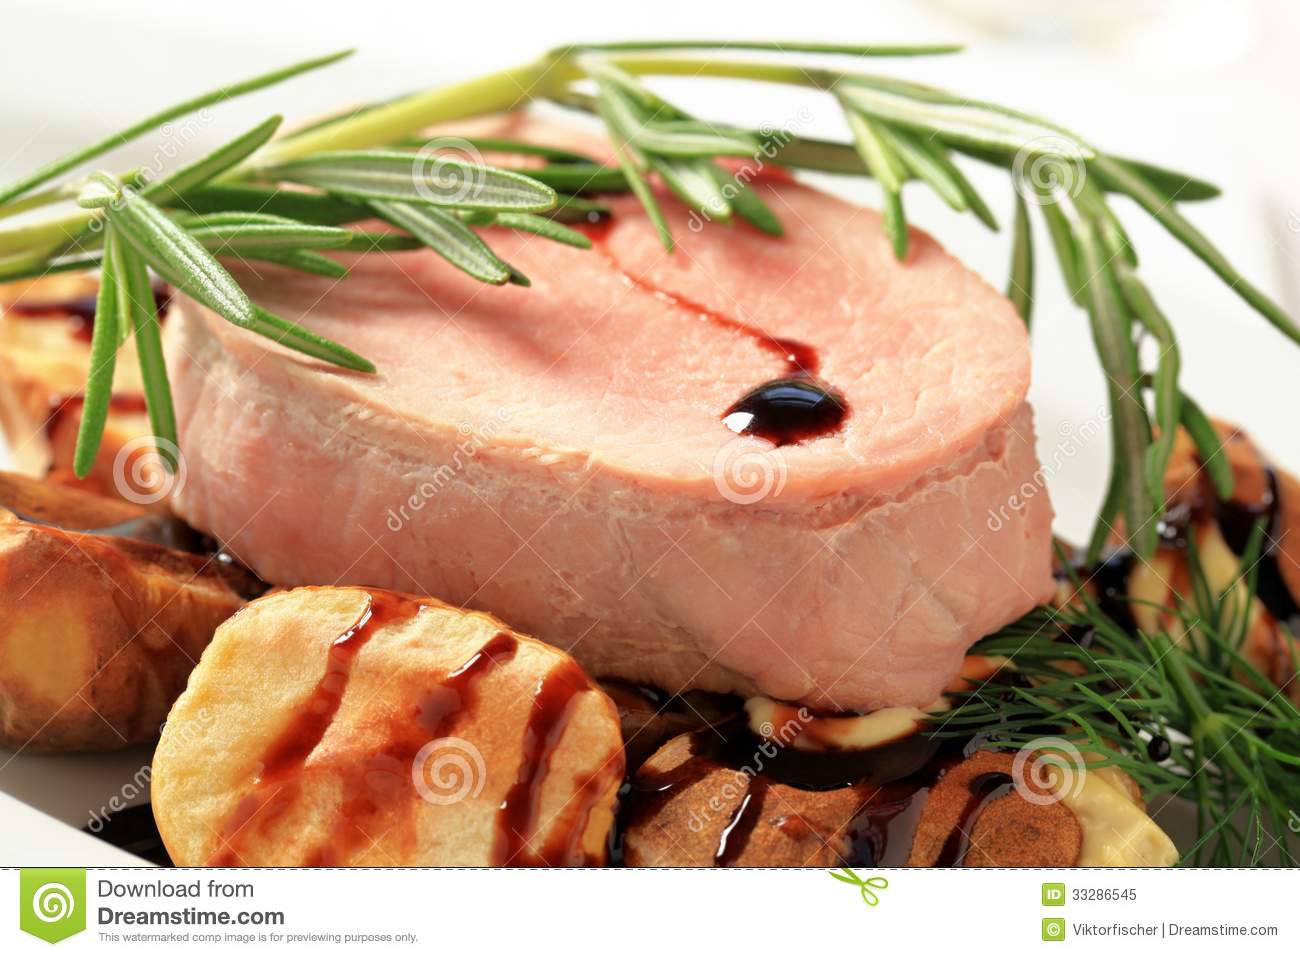 Pork Loin Steak And Baked Potatoes Royalty Free Stock Photo   Image    